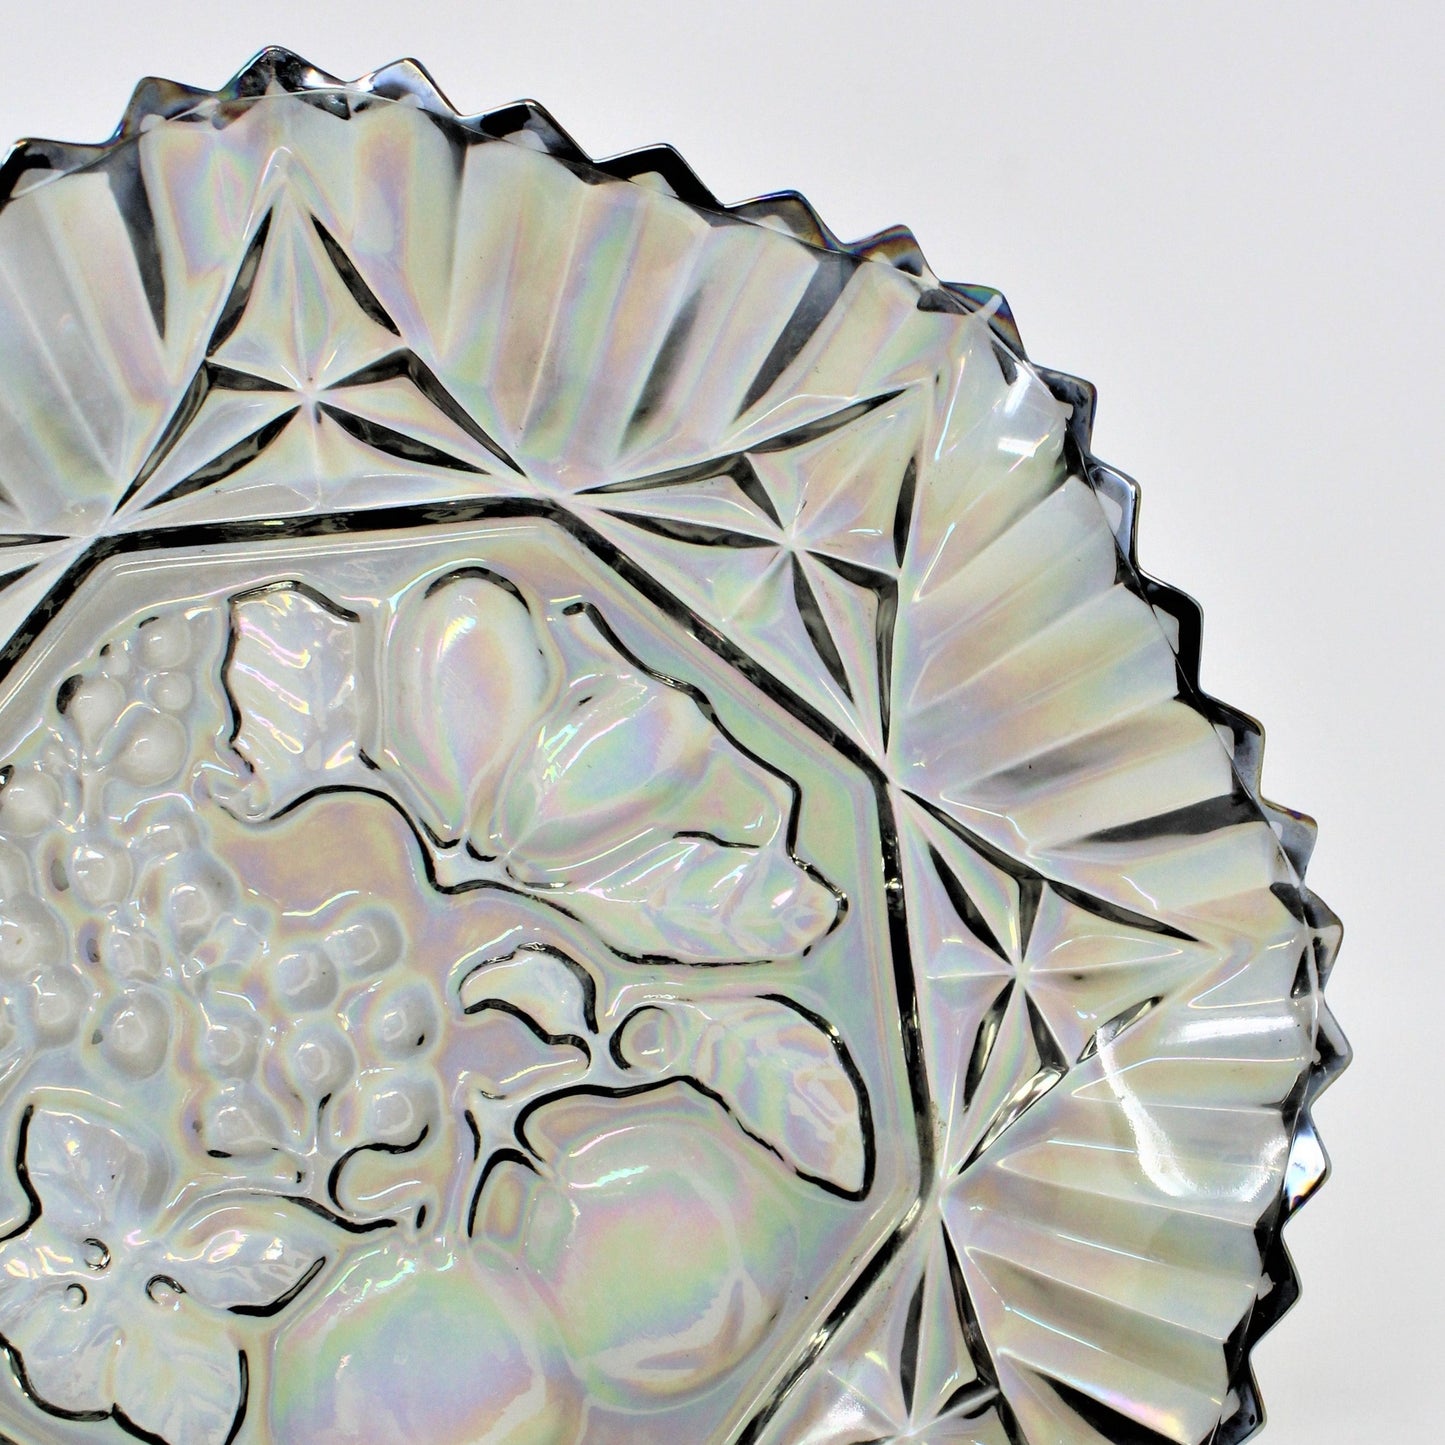 Bowl, Federal Glass, Pioneer Bowl, Revival Carnival Smoked Iridescent Glass, Vintage, 1970's